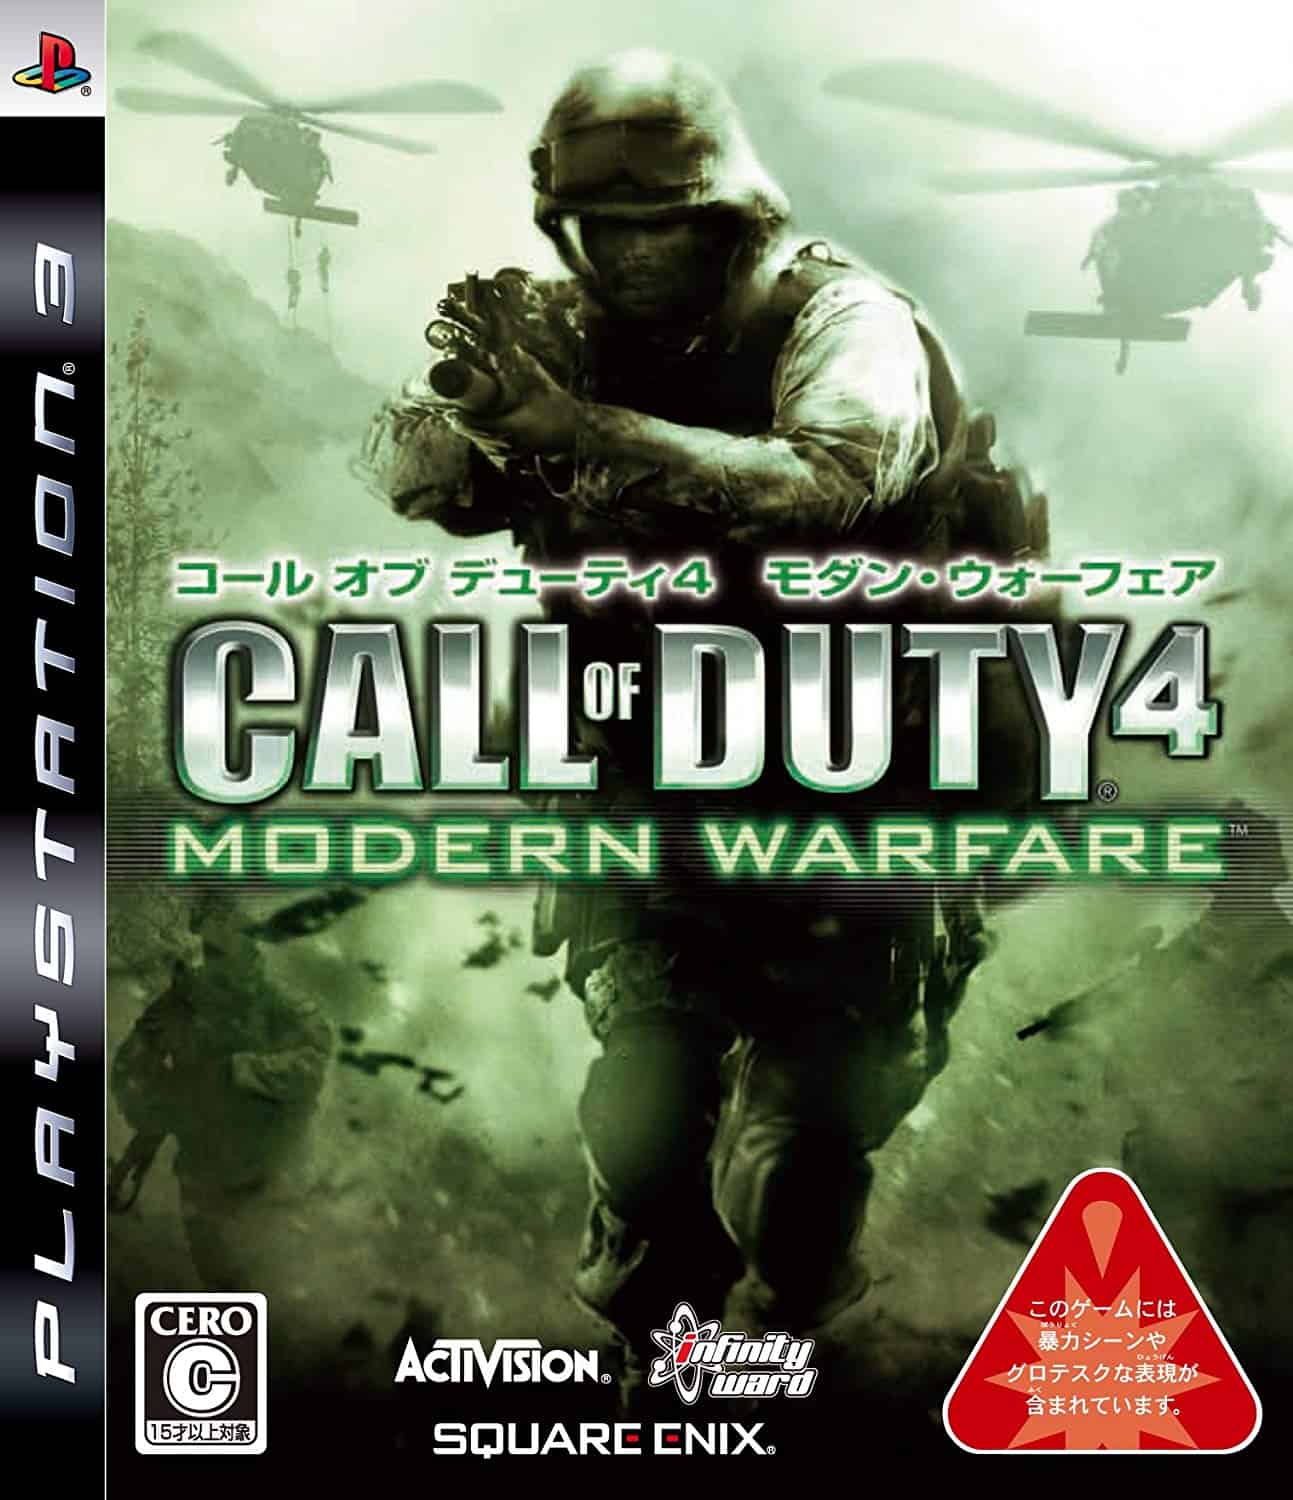 black ops game save editor ps3 download